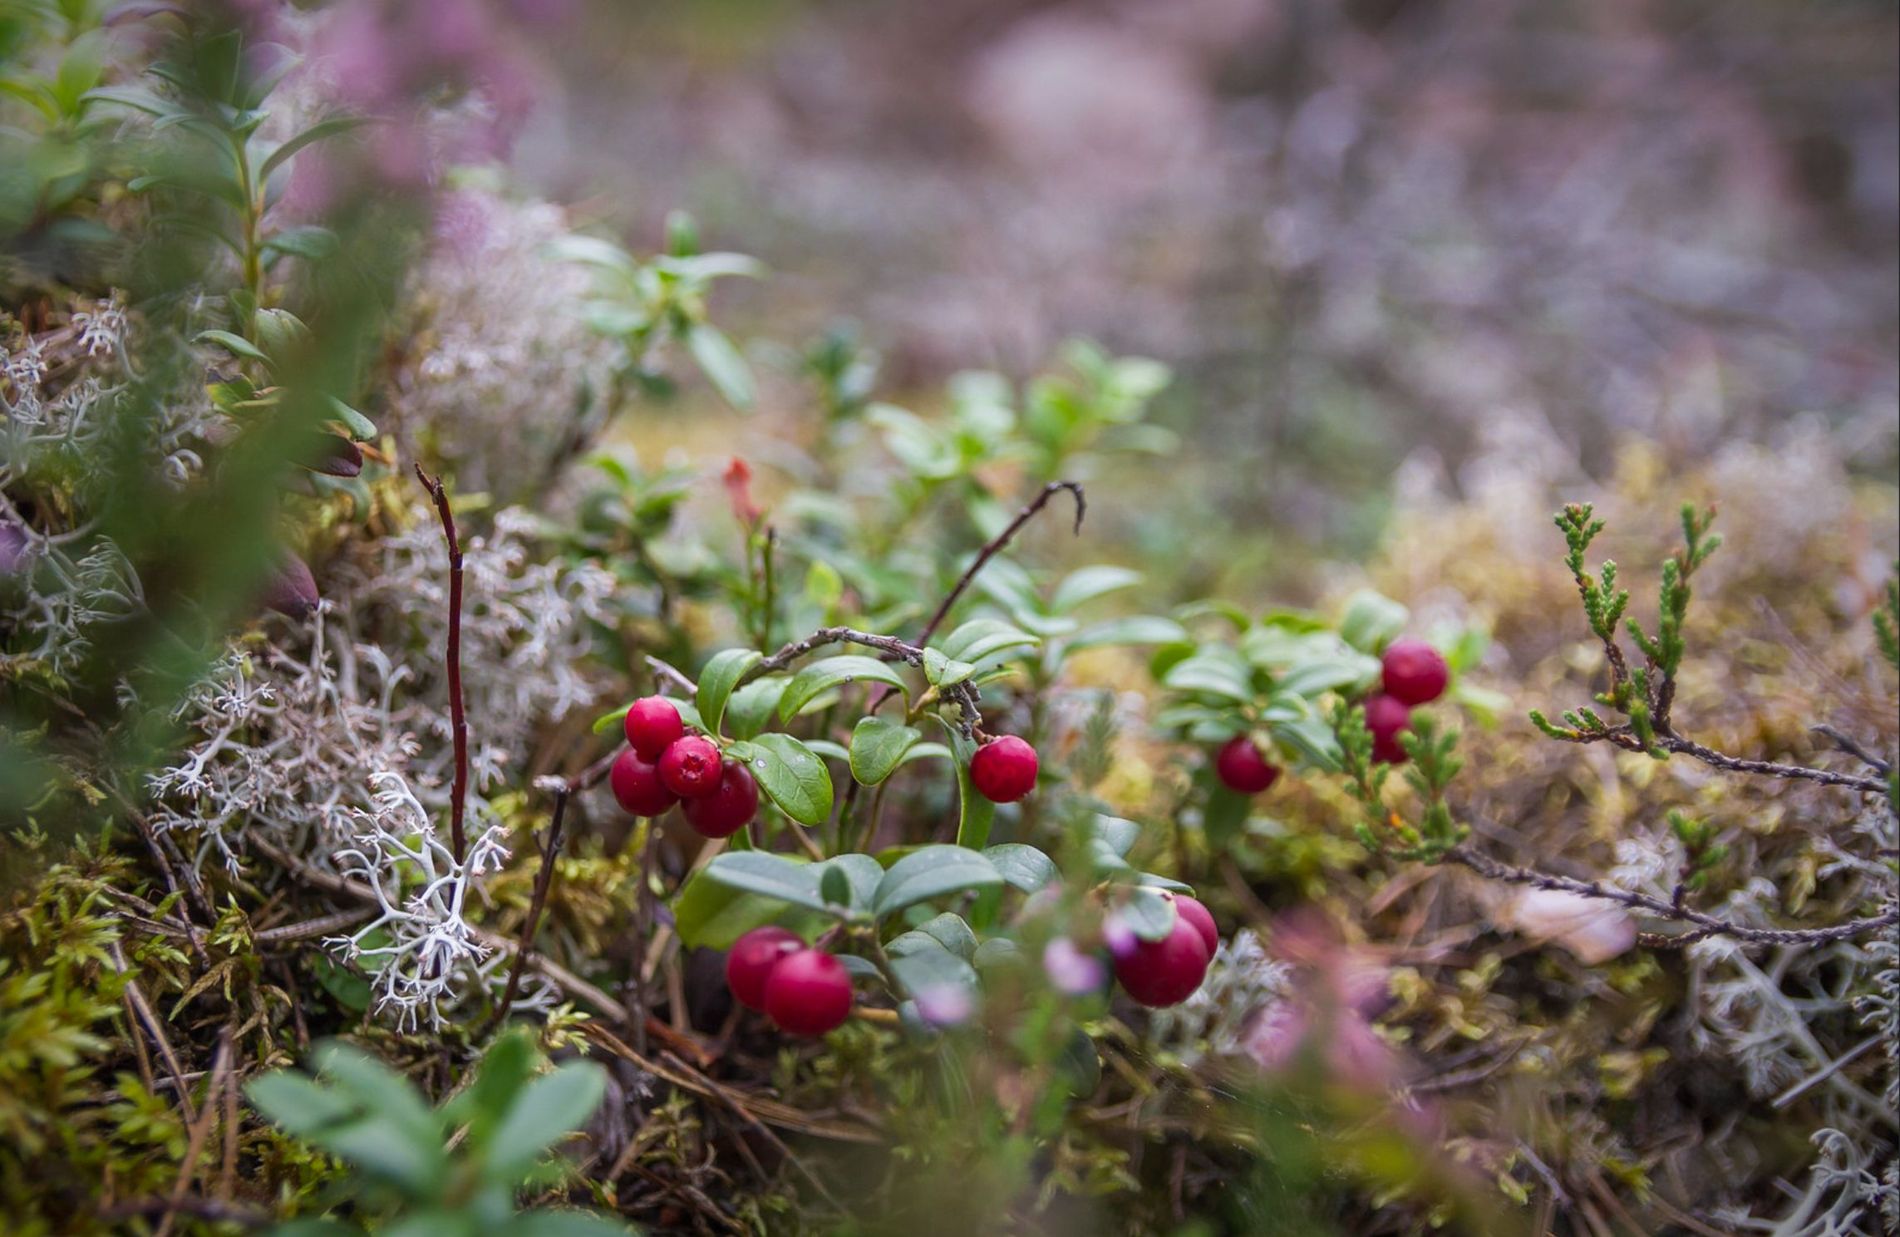 Lingonberries in Swedish forest